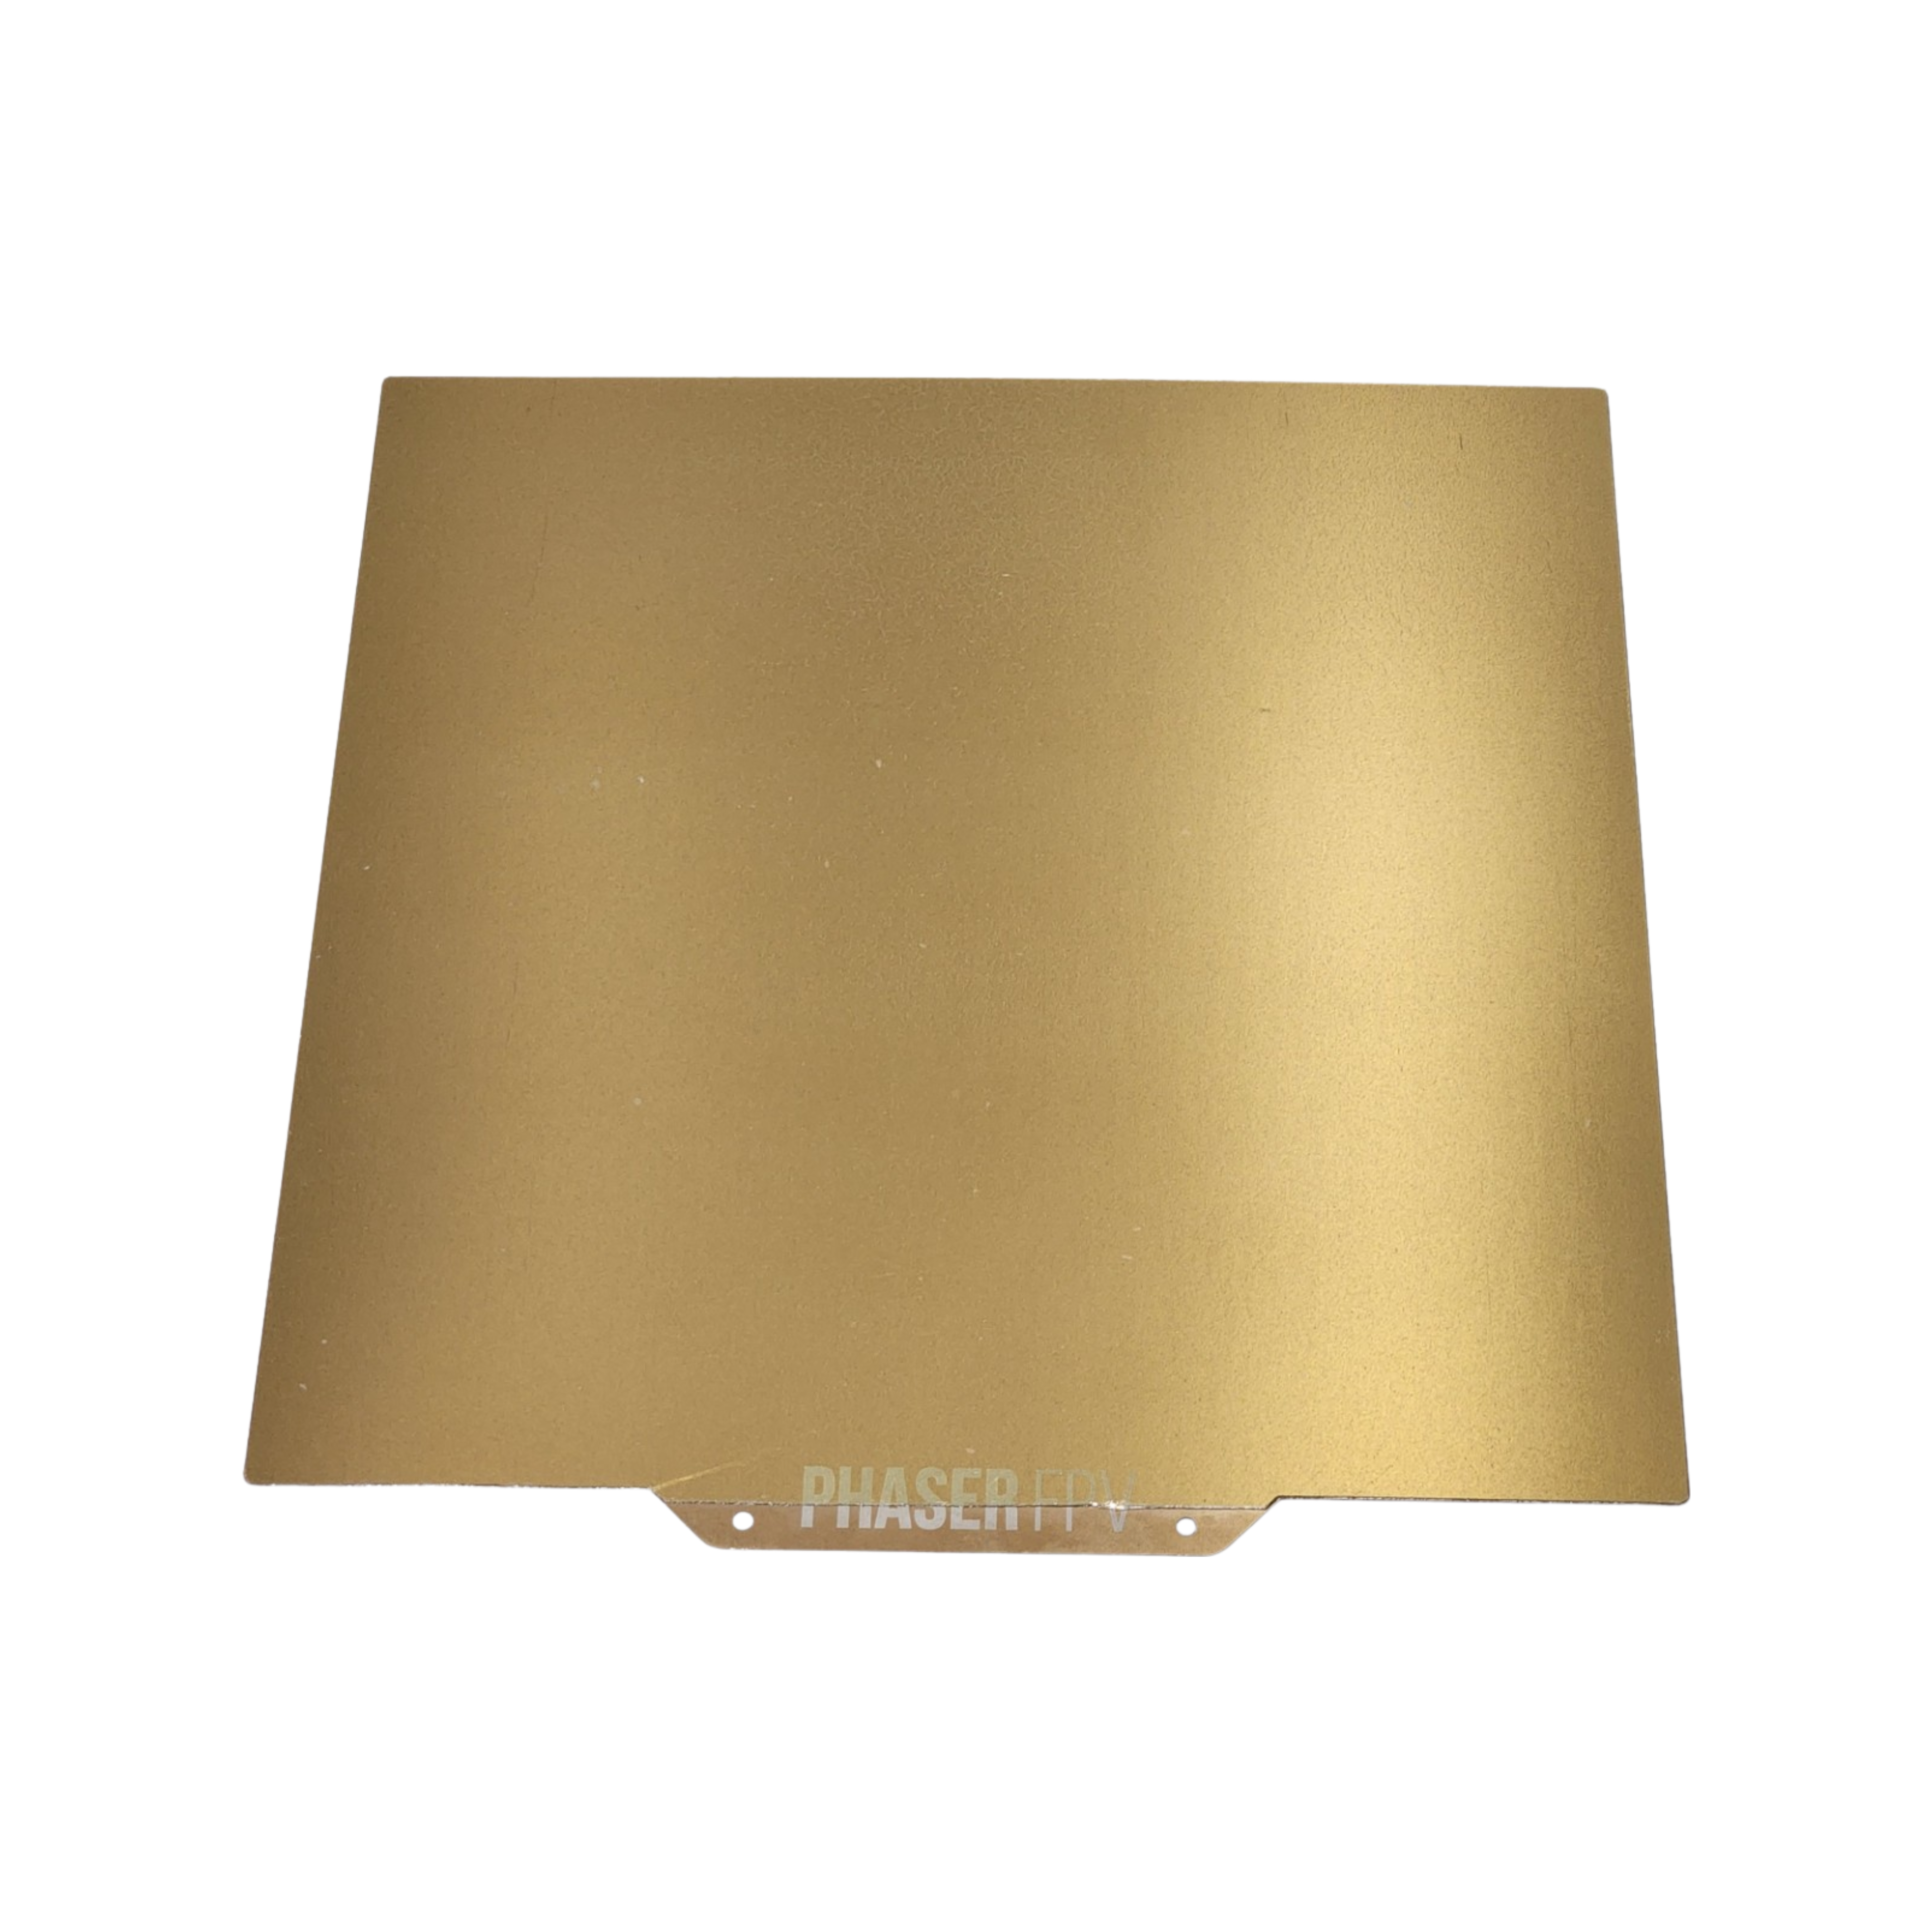 Energetic 230x230mm DOUBLE SIDED Smooth PEI/Textured Gold Spring Steel Sheet (Suits Artillery Genius)